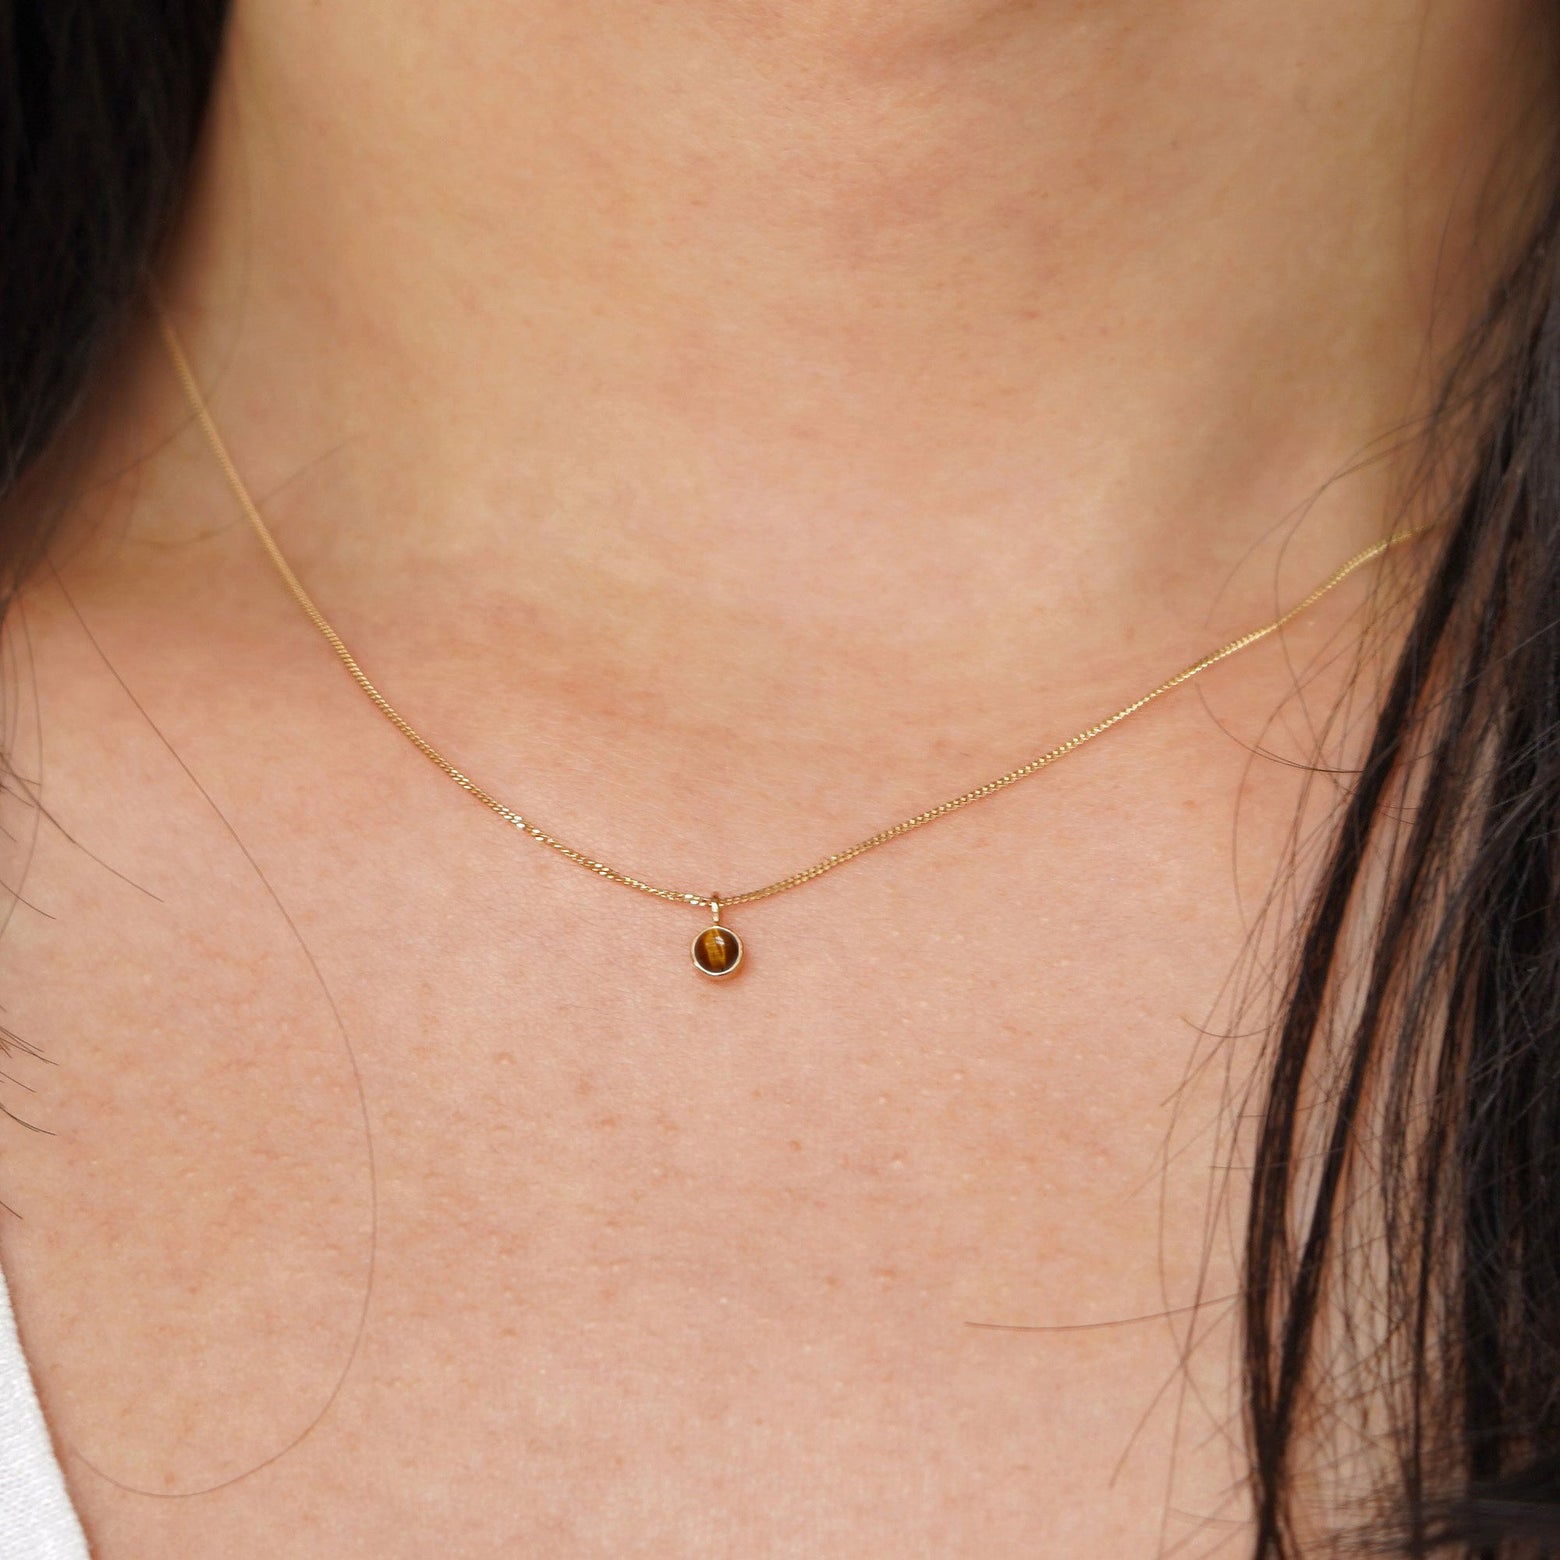 A model's neck wearing a solid 14k yellow gold Tiger Eye necklace